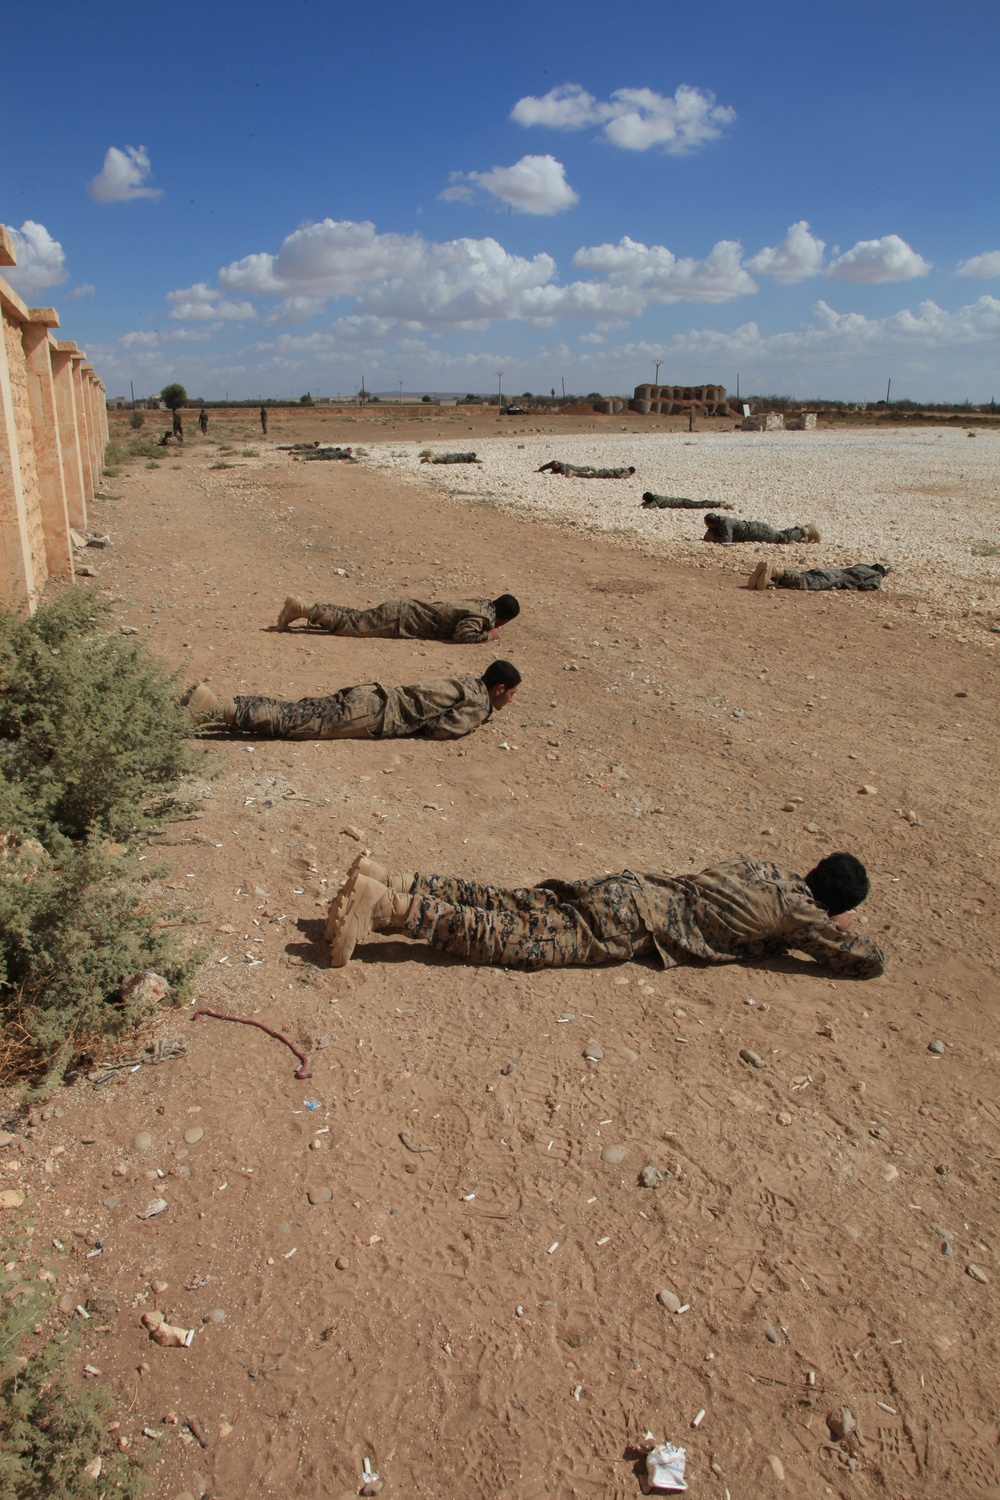 Syrian Democratic Forces train to detect, mark, and disable improvised explosive devices